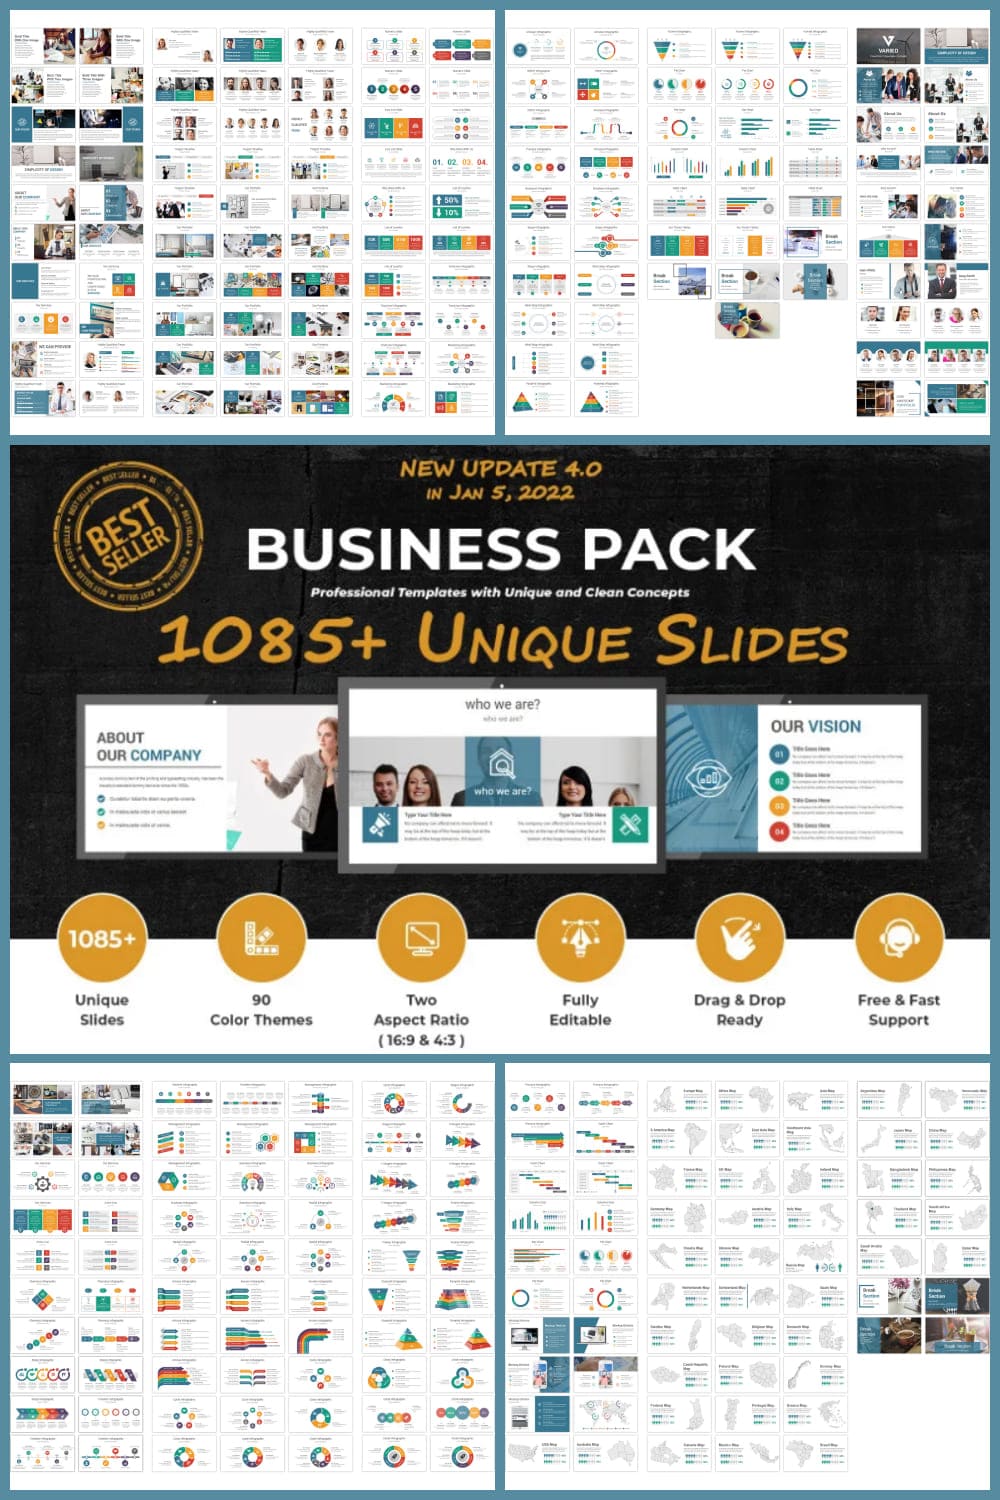 Business Pack PowerPoint Template Collage image.